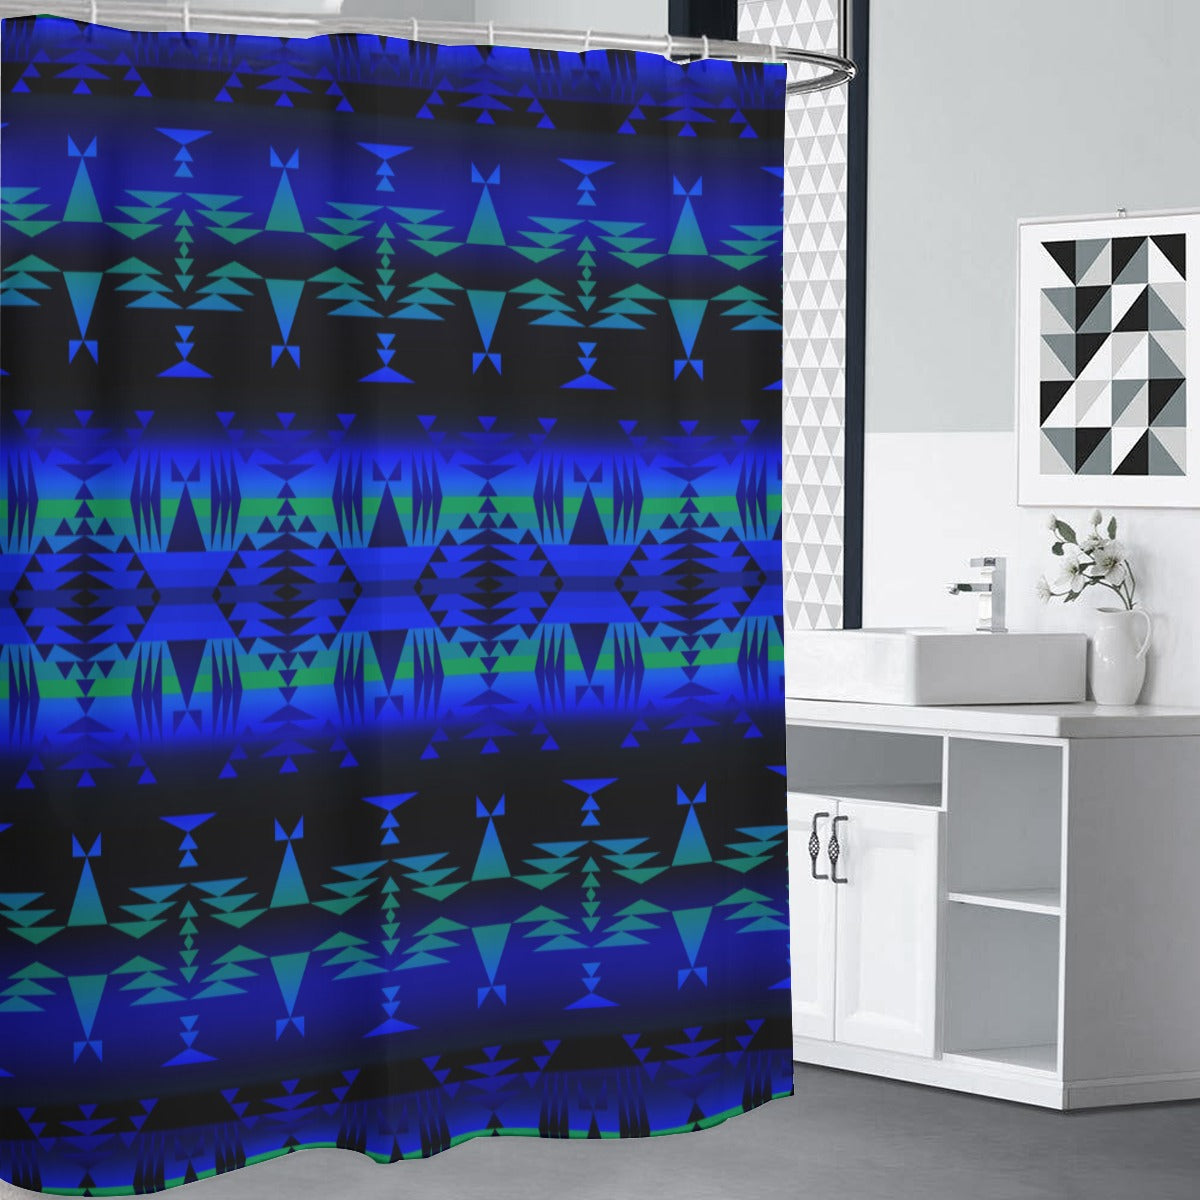 Between the Blue Ridge Mountains Shower Curtain (59 inch x 71 inch)